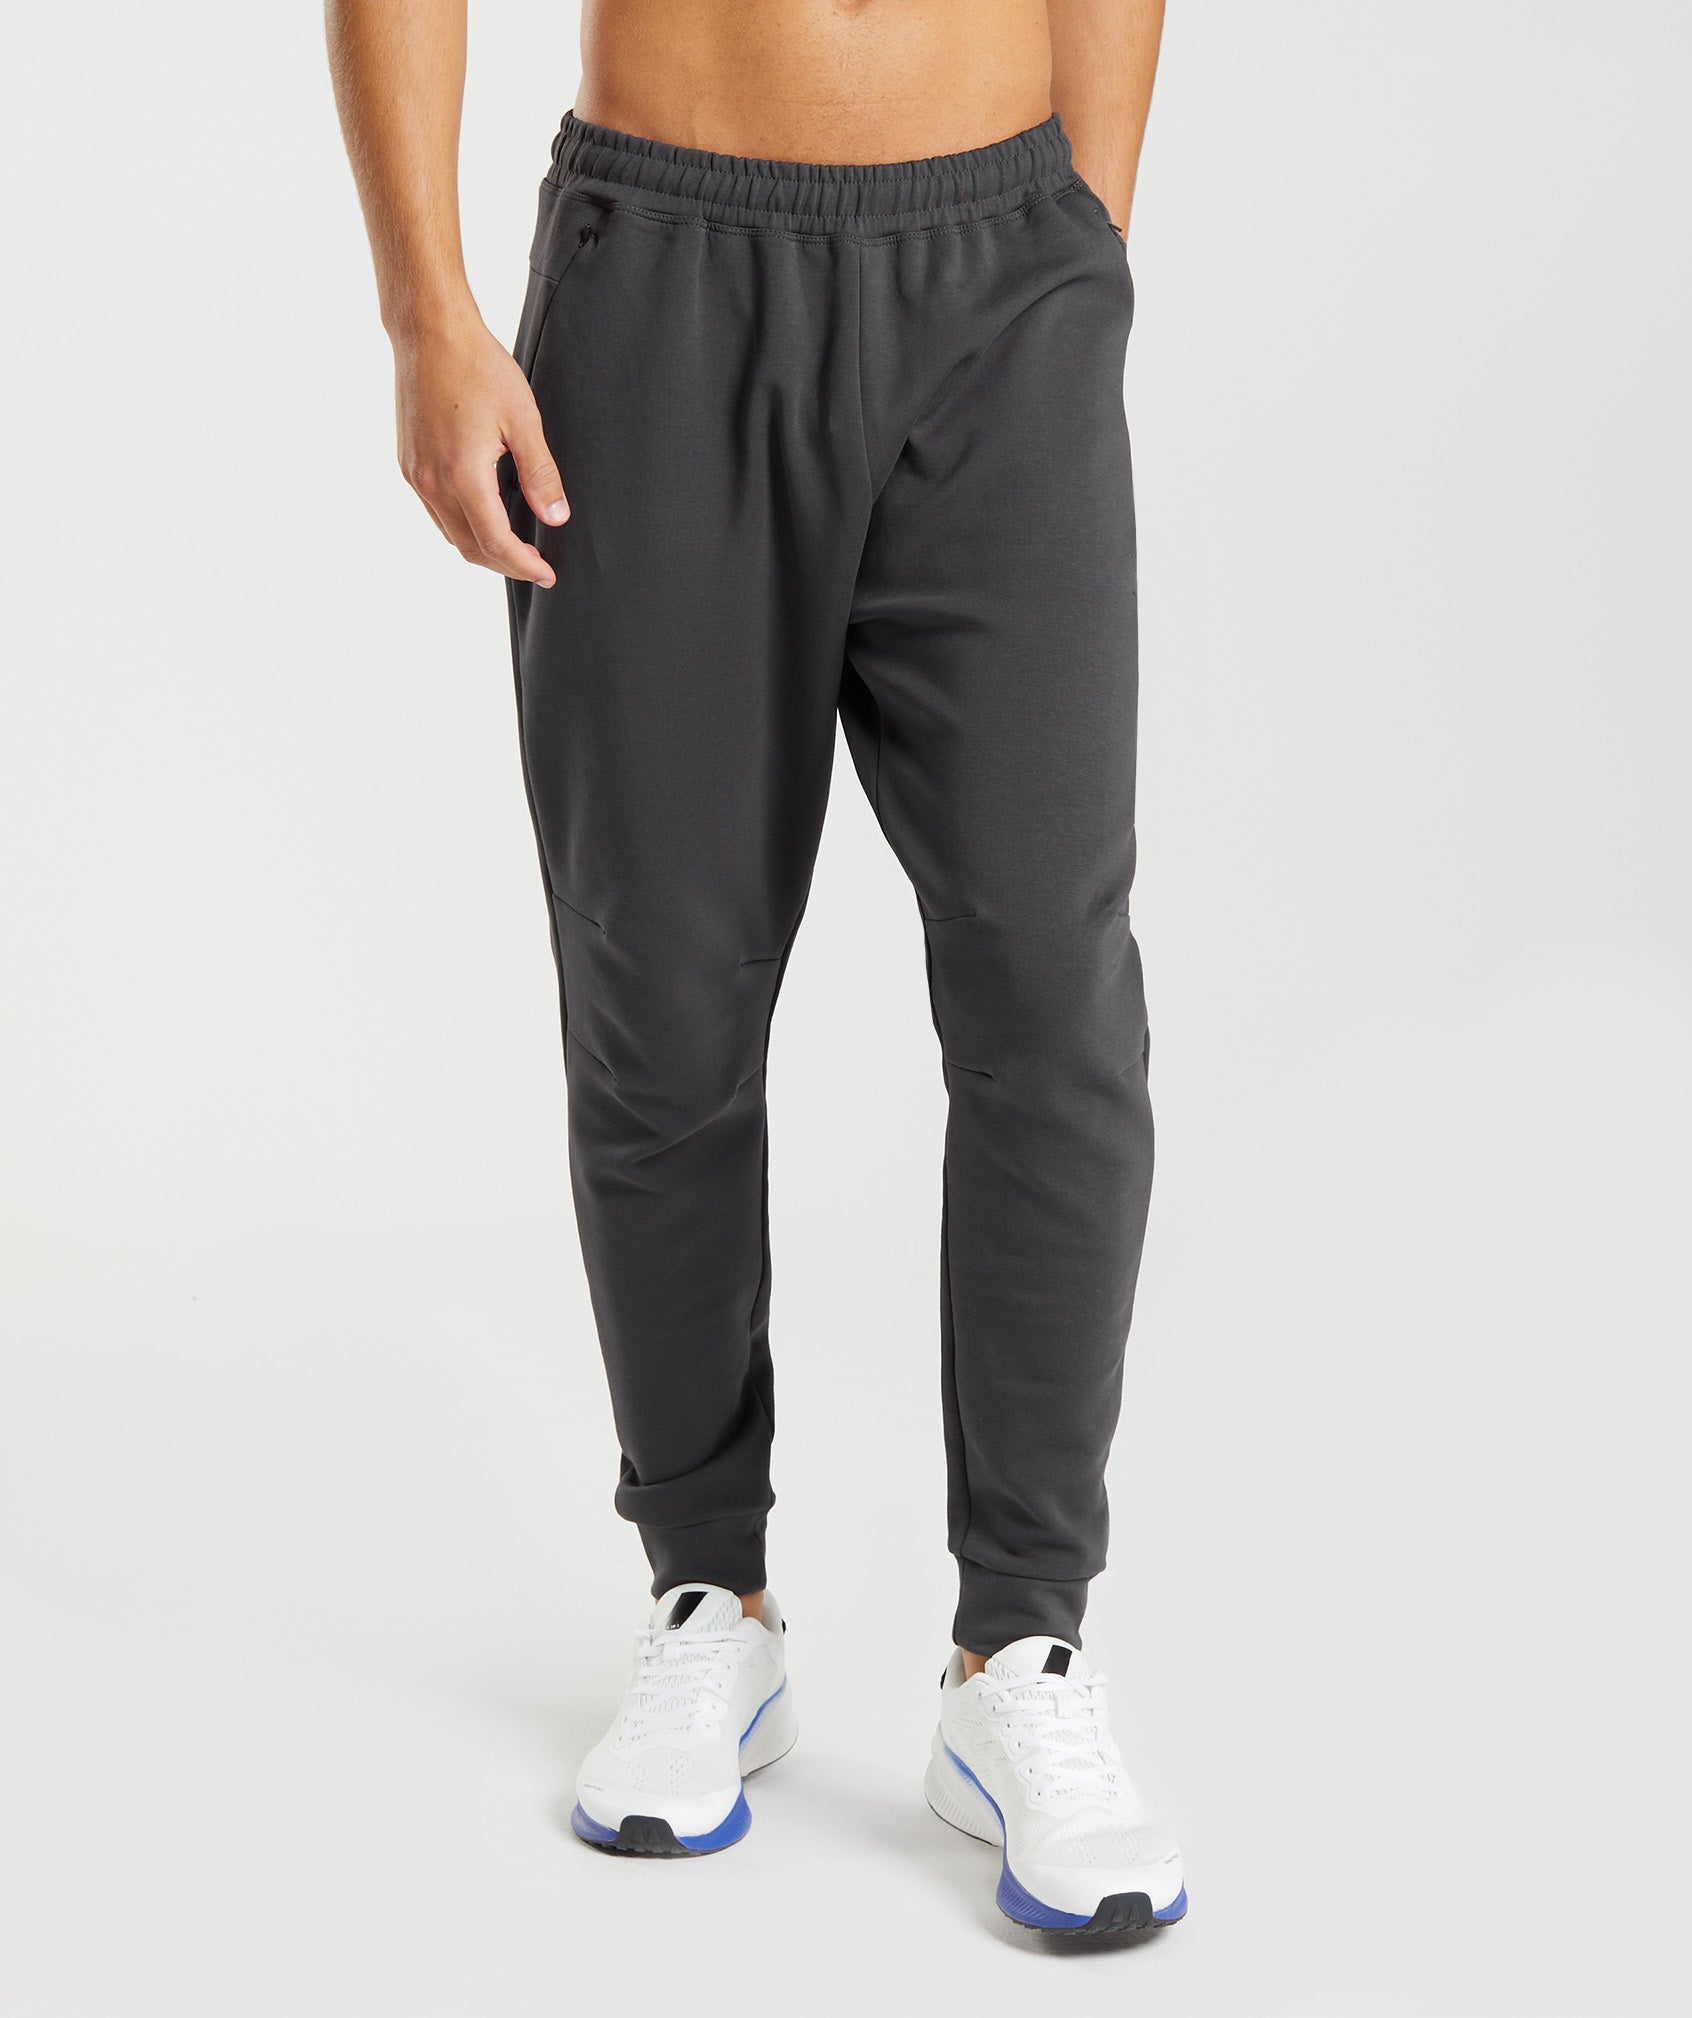 Gymshark Rest Day Knit Joggers - Pebble Grey